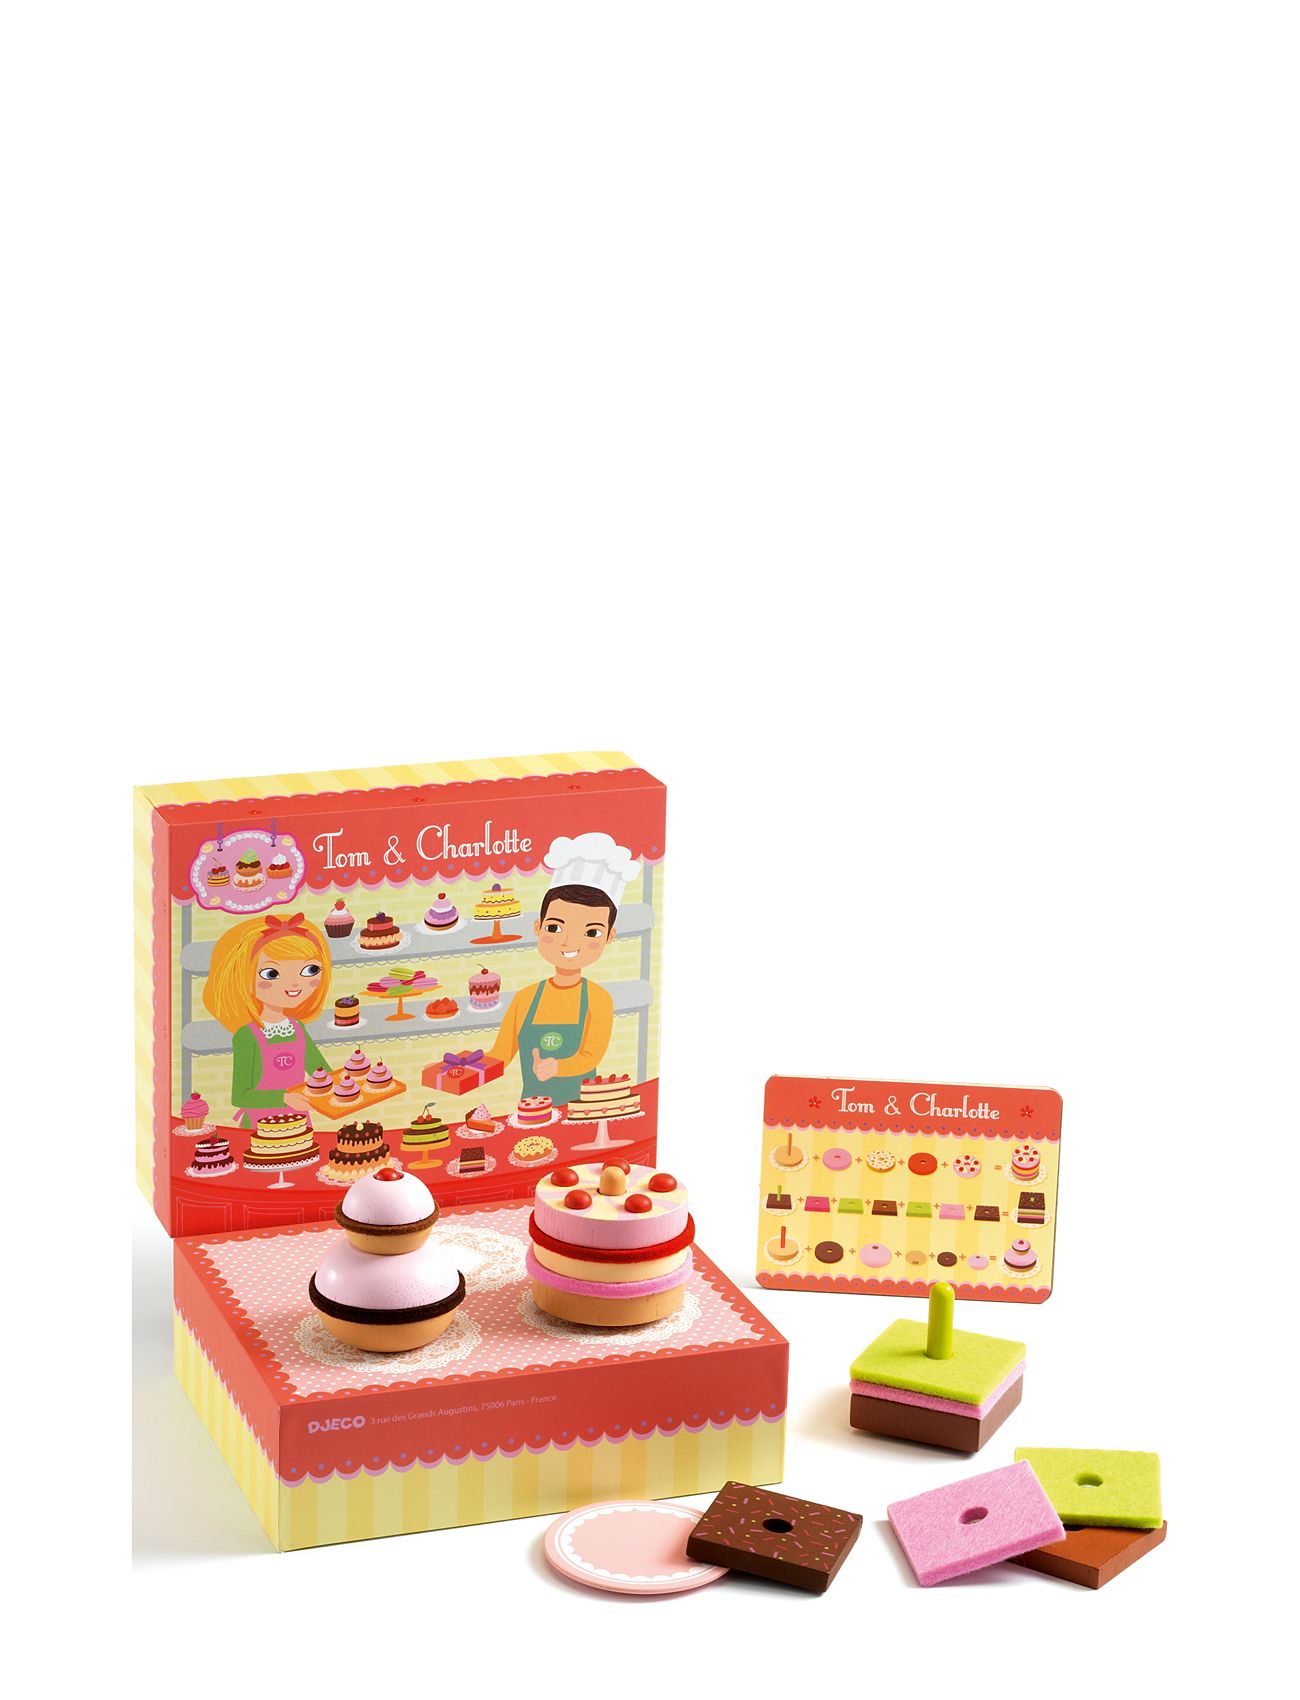 Charlotte & Tom, Cake Shop Toys Toy Kitchen & Accessories Toy Food & Cakes Multi/patterned Djeco